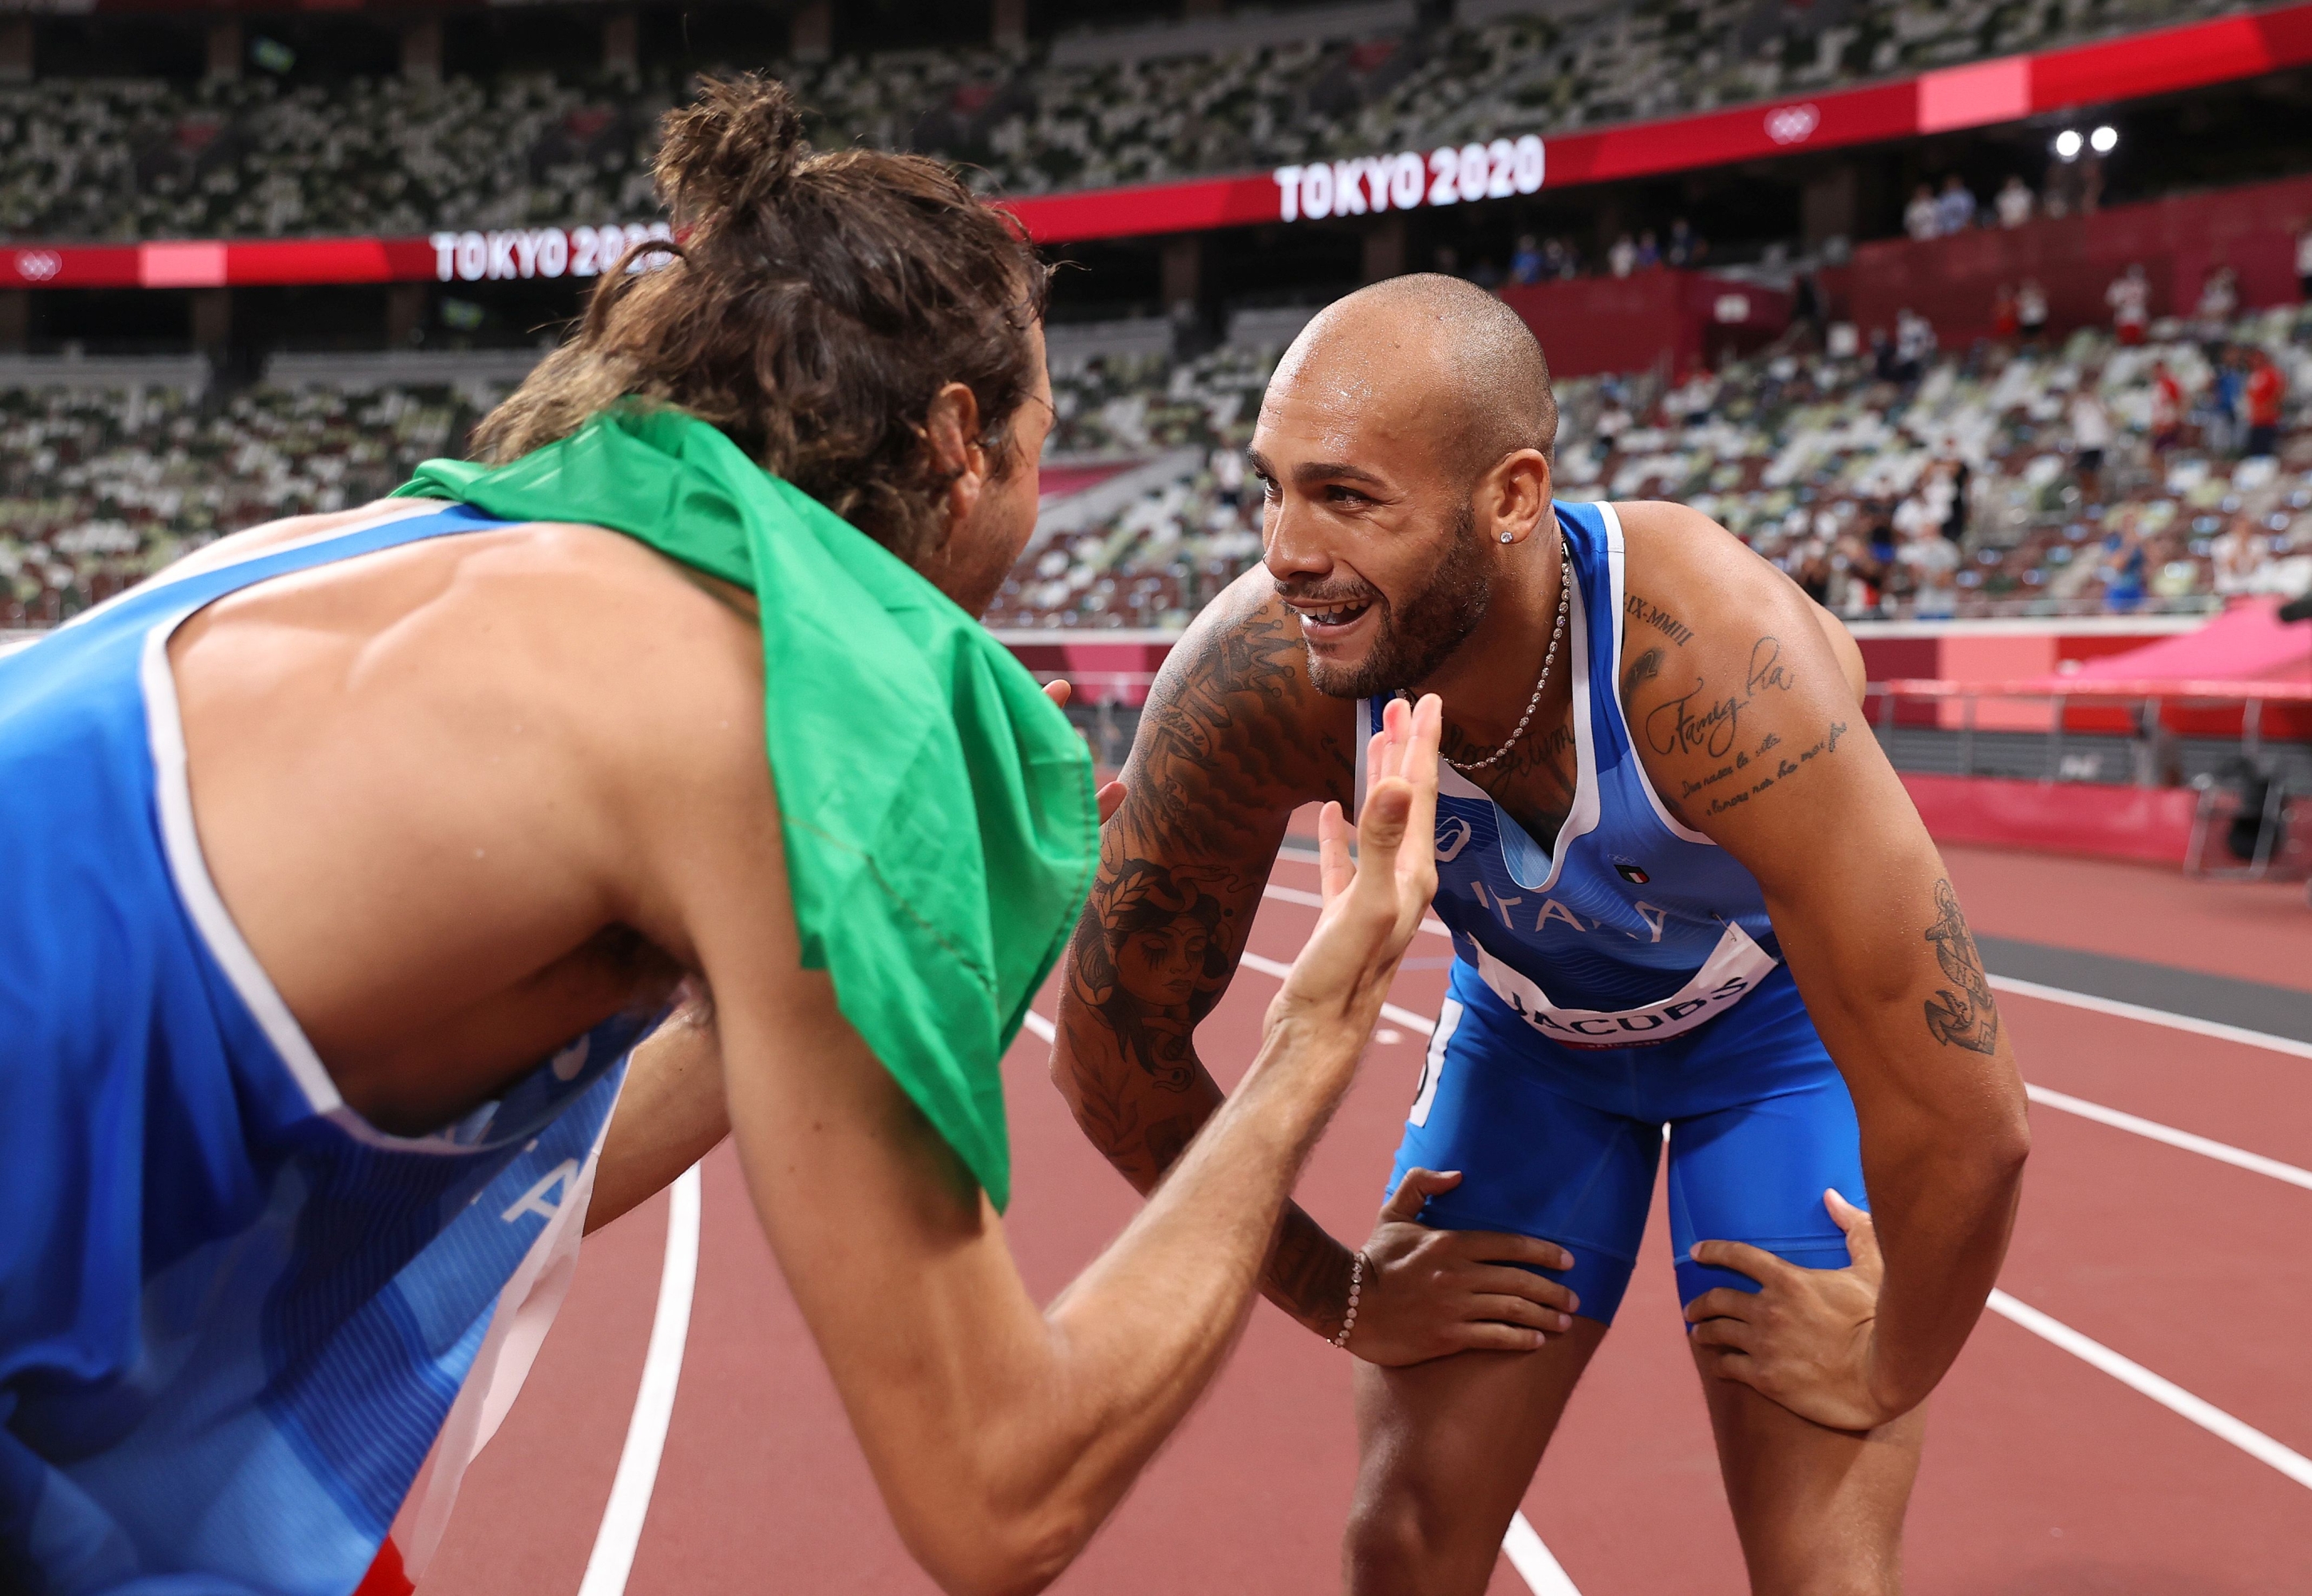 TOKYO, JAPAN - AUGUST 01: Lamont Marcell Jacobs of Team Italy is congratulated by teammate Gianmarco Tamberi after winning the Men's 100m Final on day nine of the Tokyo 2020 Olympic Games at Olympic Stadium on August 01, 2021 in Tokyo, Japan. (Photo by Cameron Spencer/Getty Images)